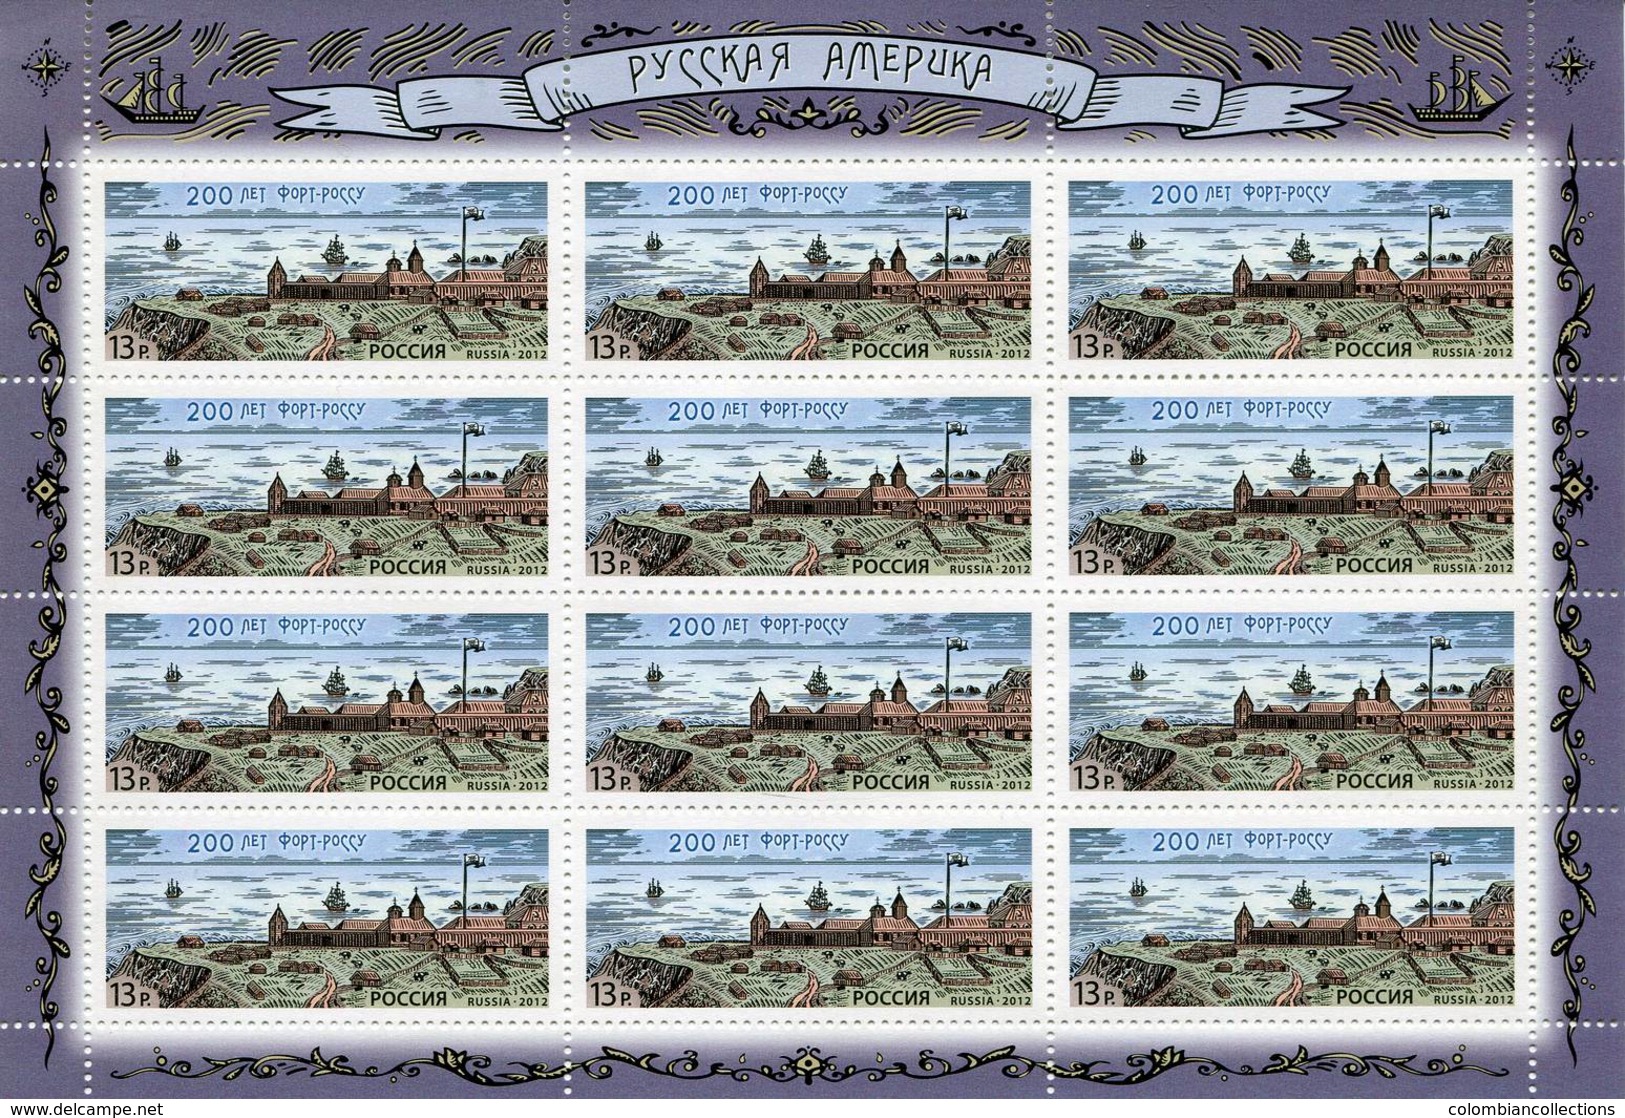 Lote 2012-1, 2012, Rusia, Russia, Pliego, Sheet, Bicentenary Of Fort-Ross, Former Russian On West California, USA - FDC